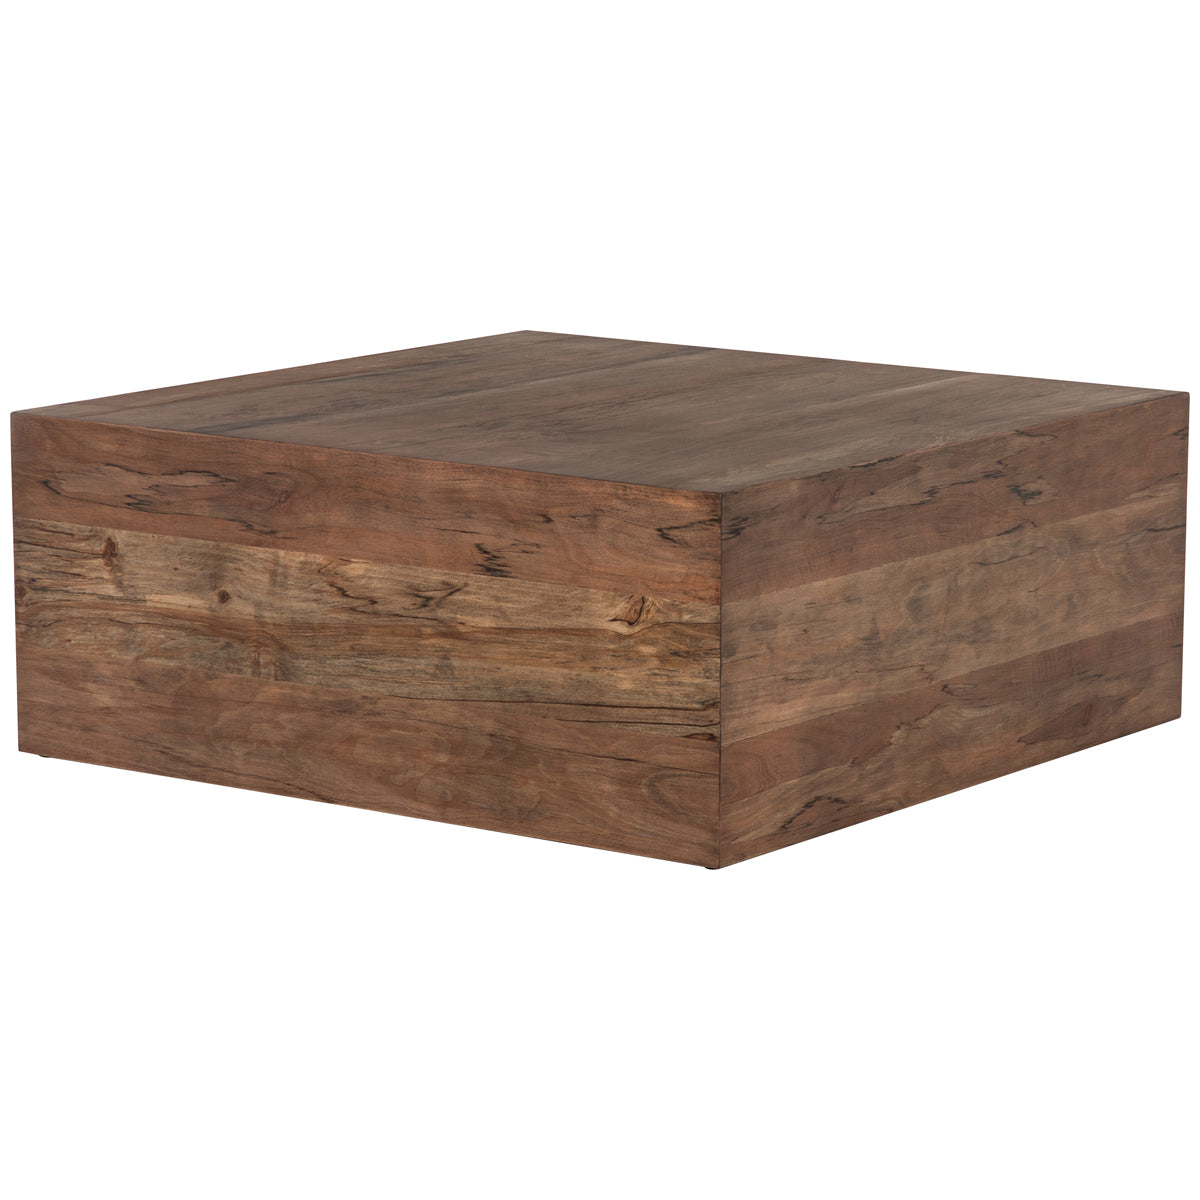 Four Hands Wesson Covell Sectional Corner Table - Spalted Alder